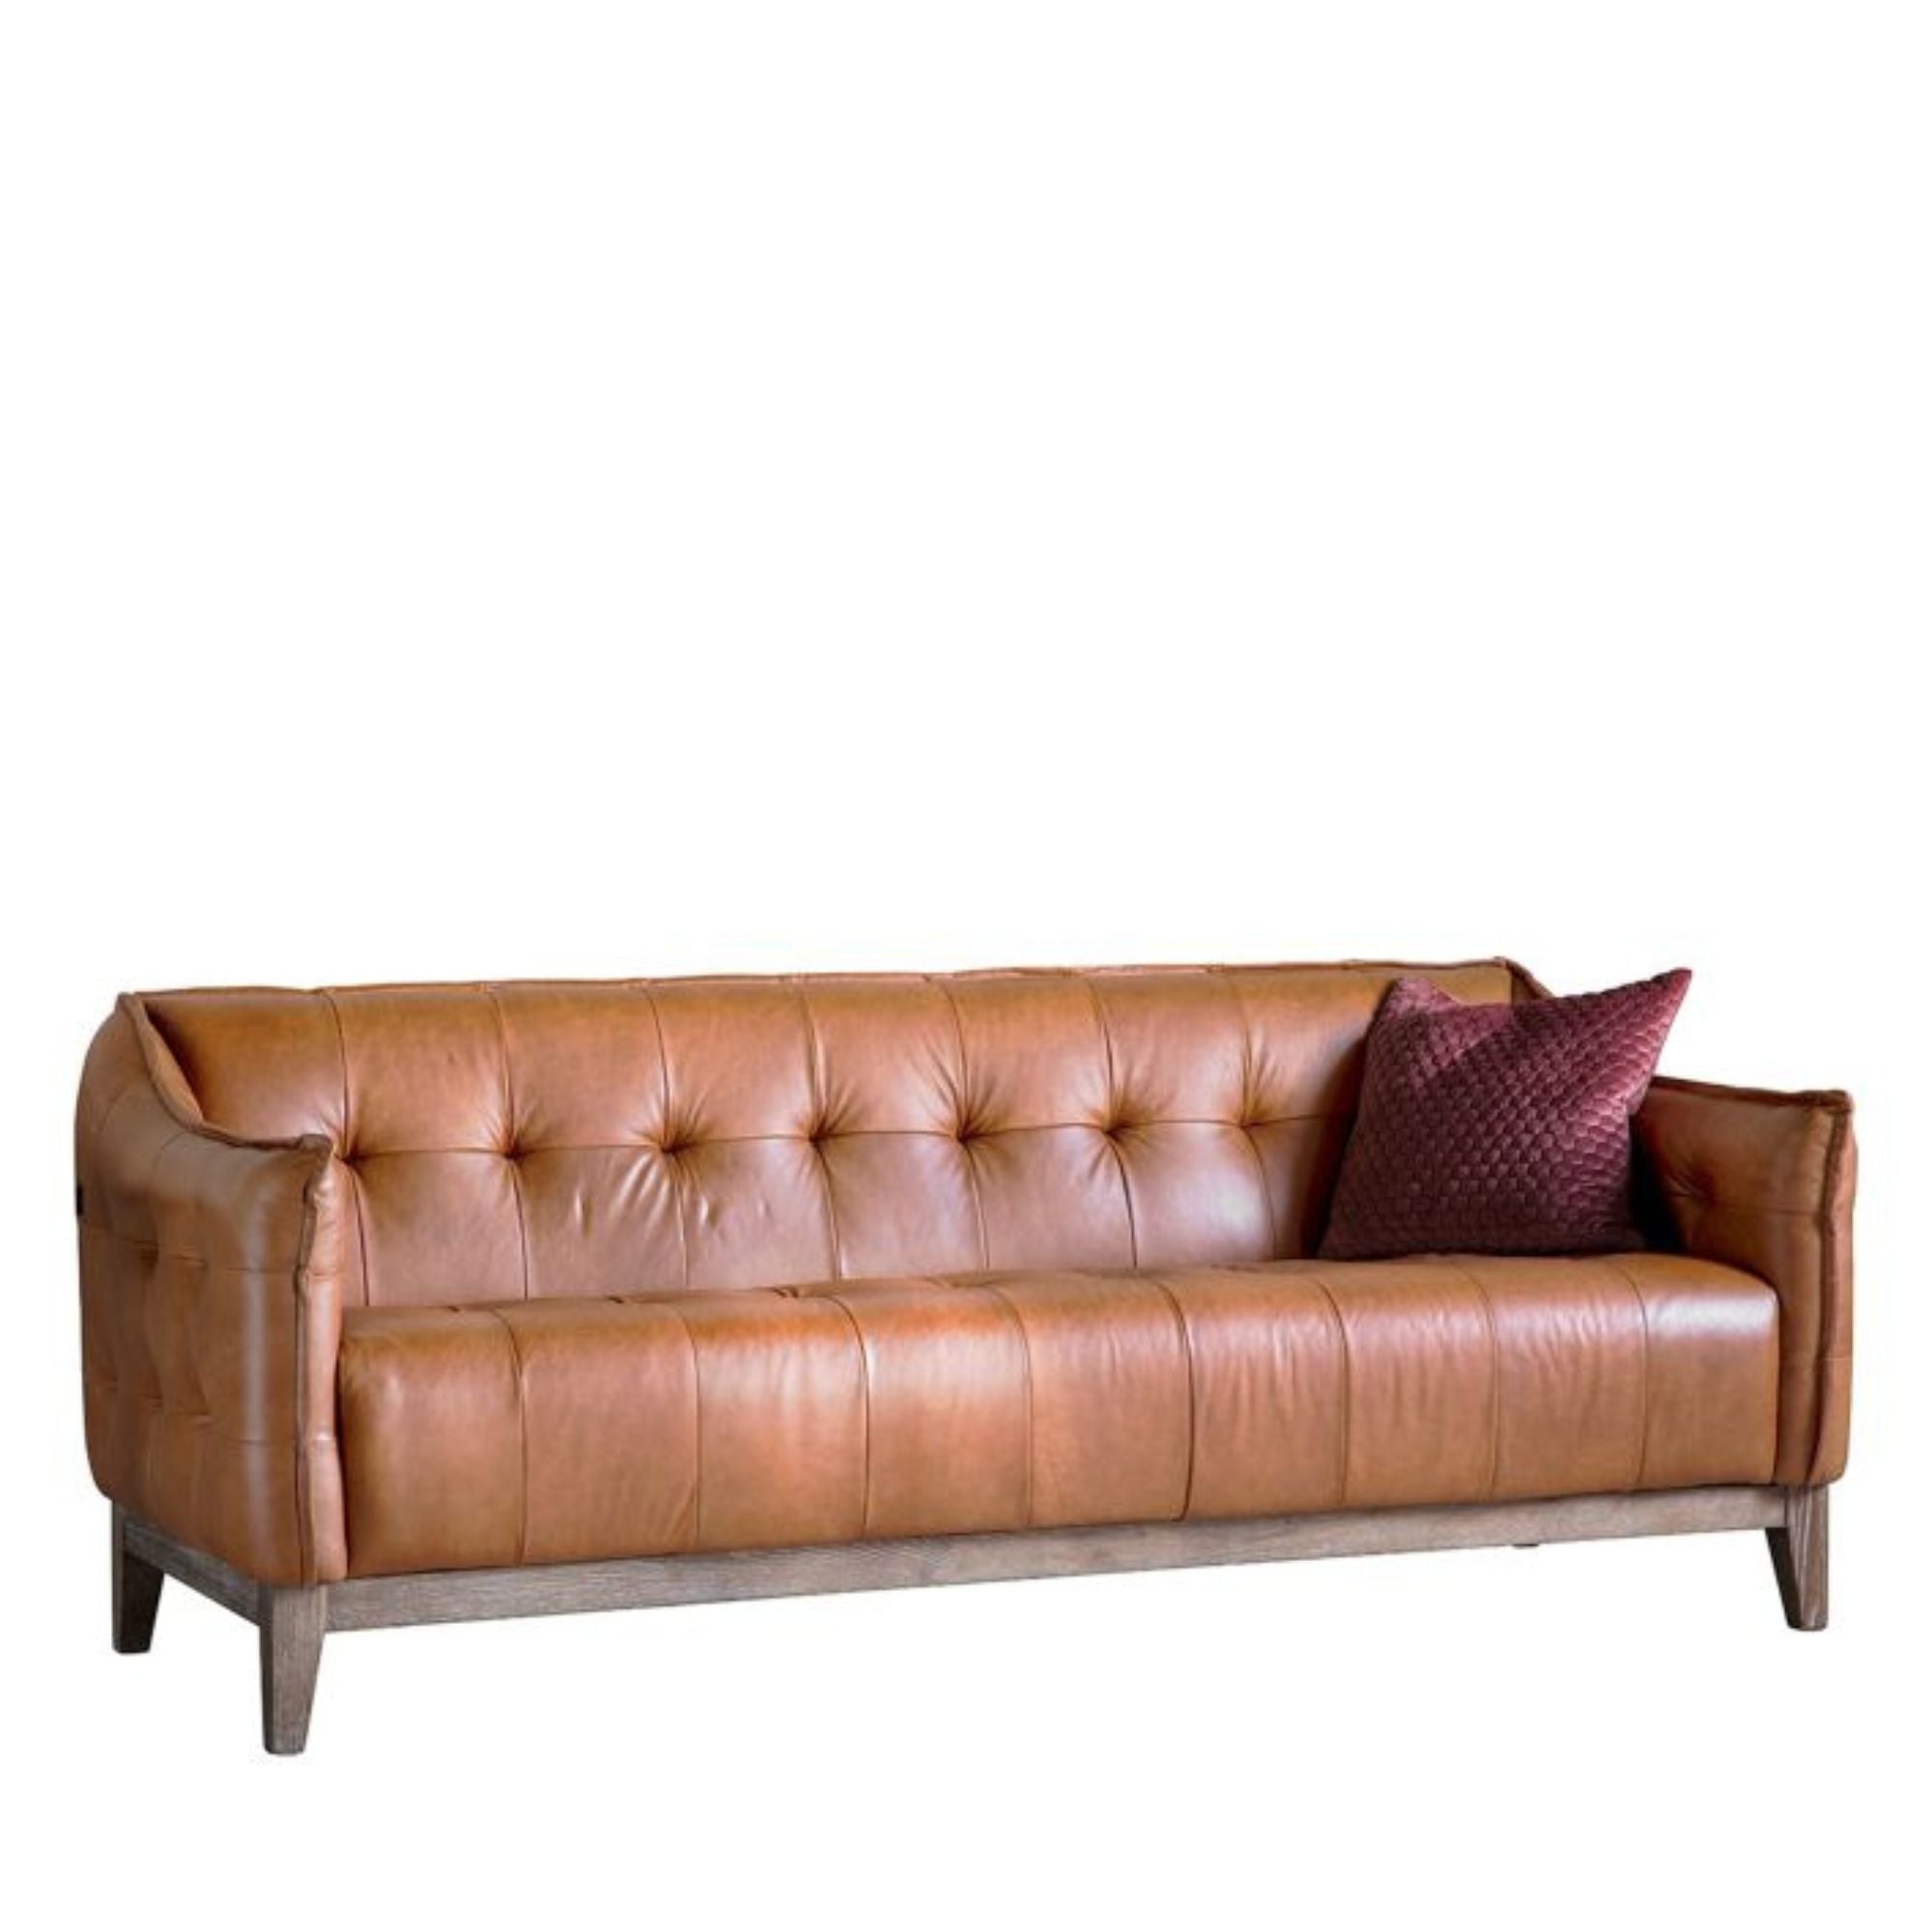 Chase 3 seat sofa in vintage brown leather with deep buttoned detailing and solid ash base and legs | MalletandPlane.com